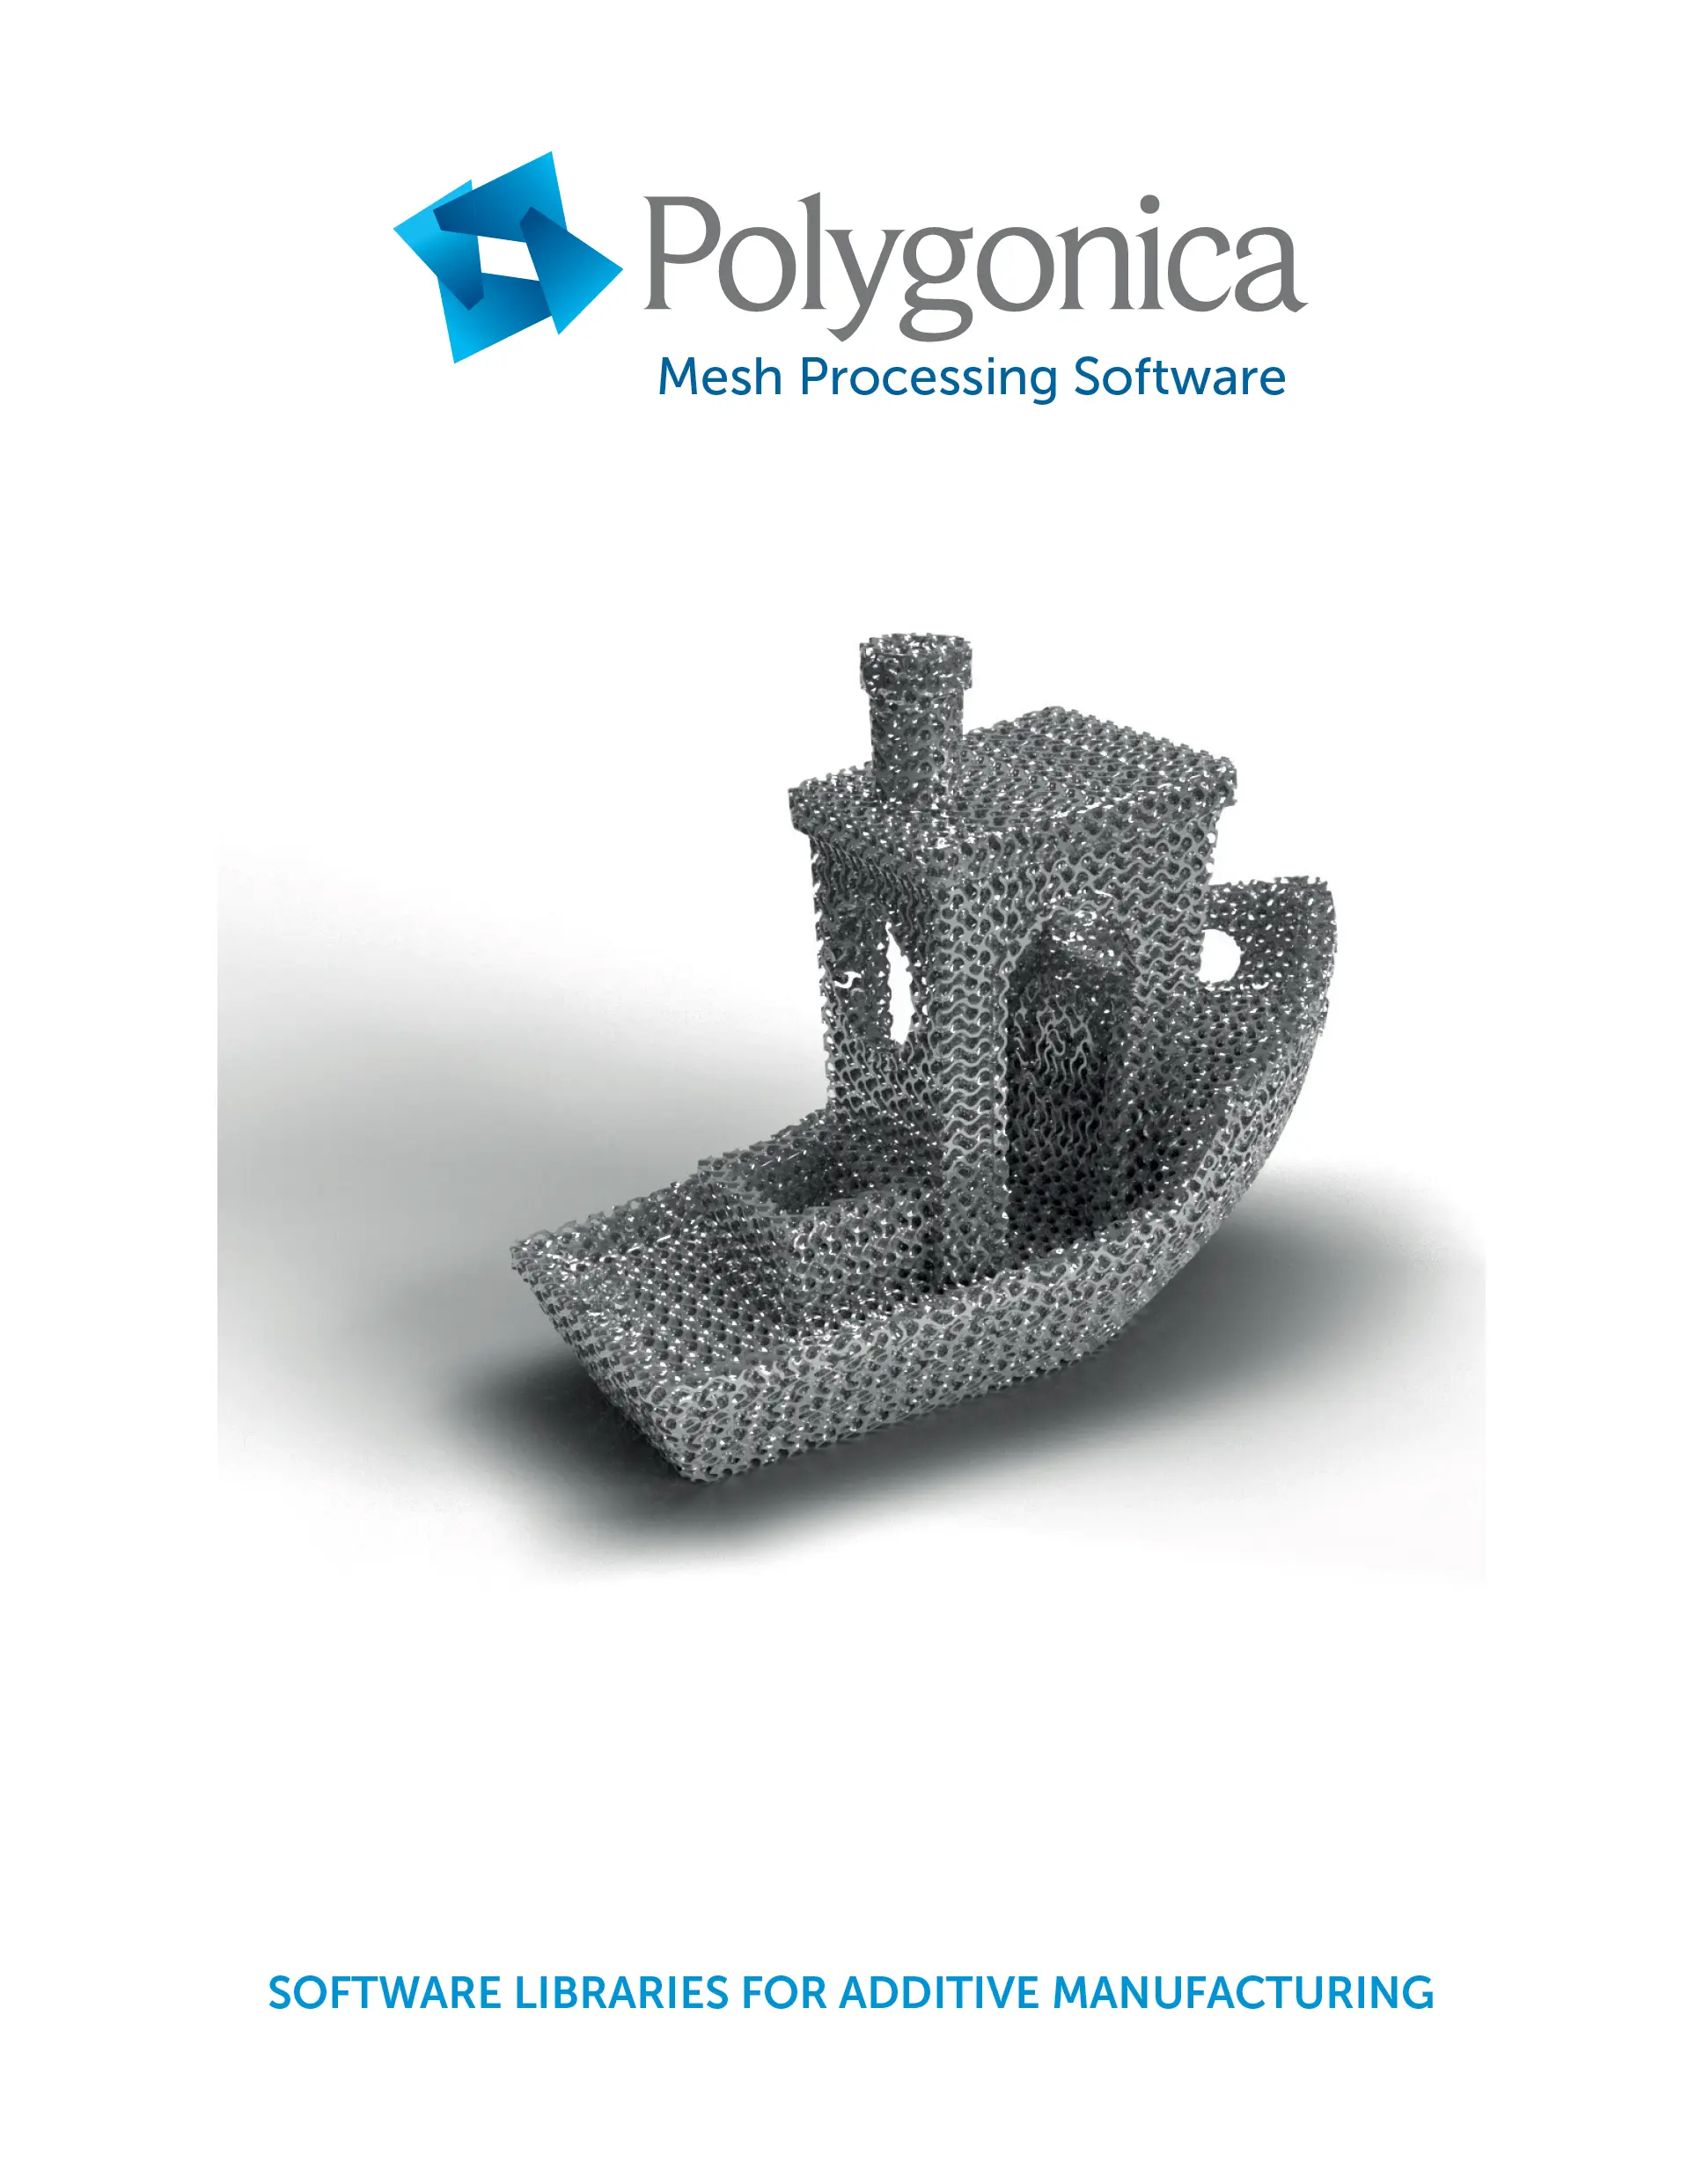 Polygonica Additive Manufacturing Brochure pdf cover